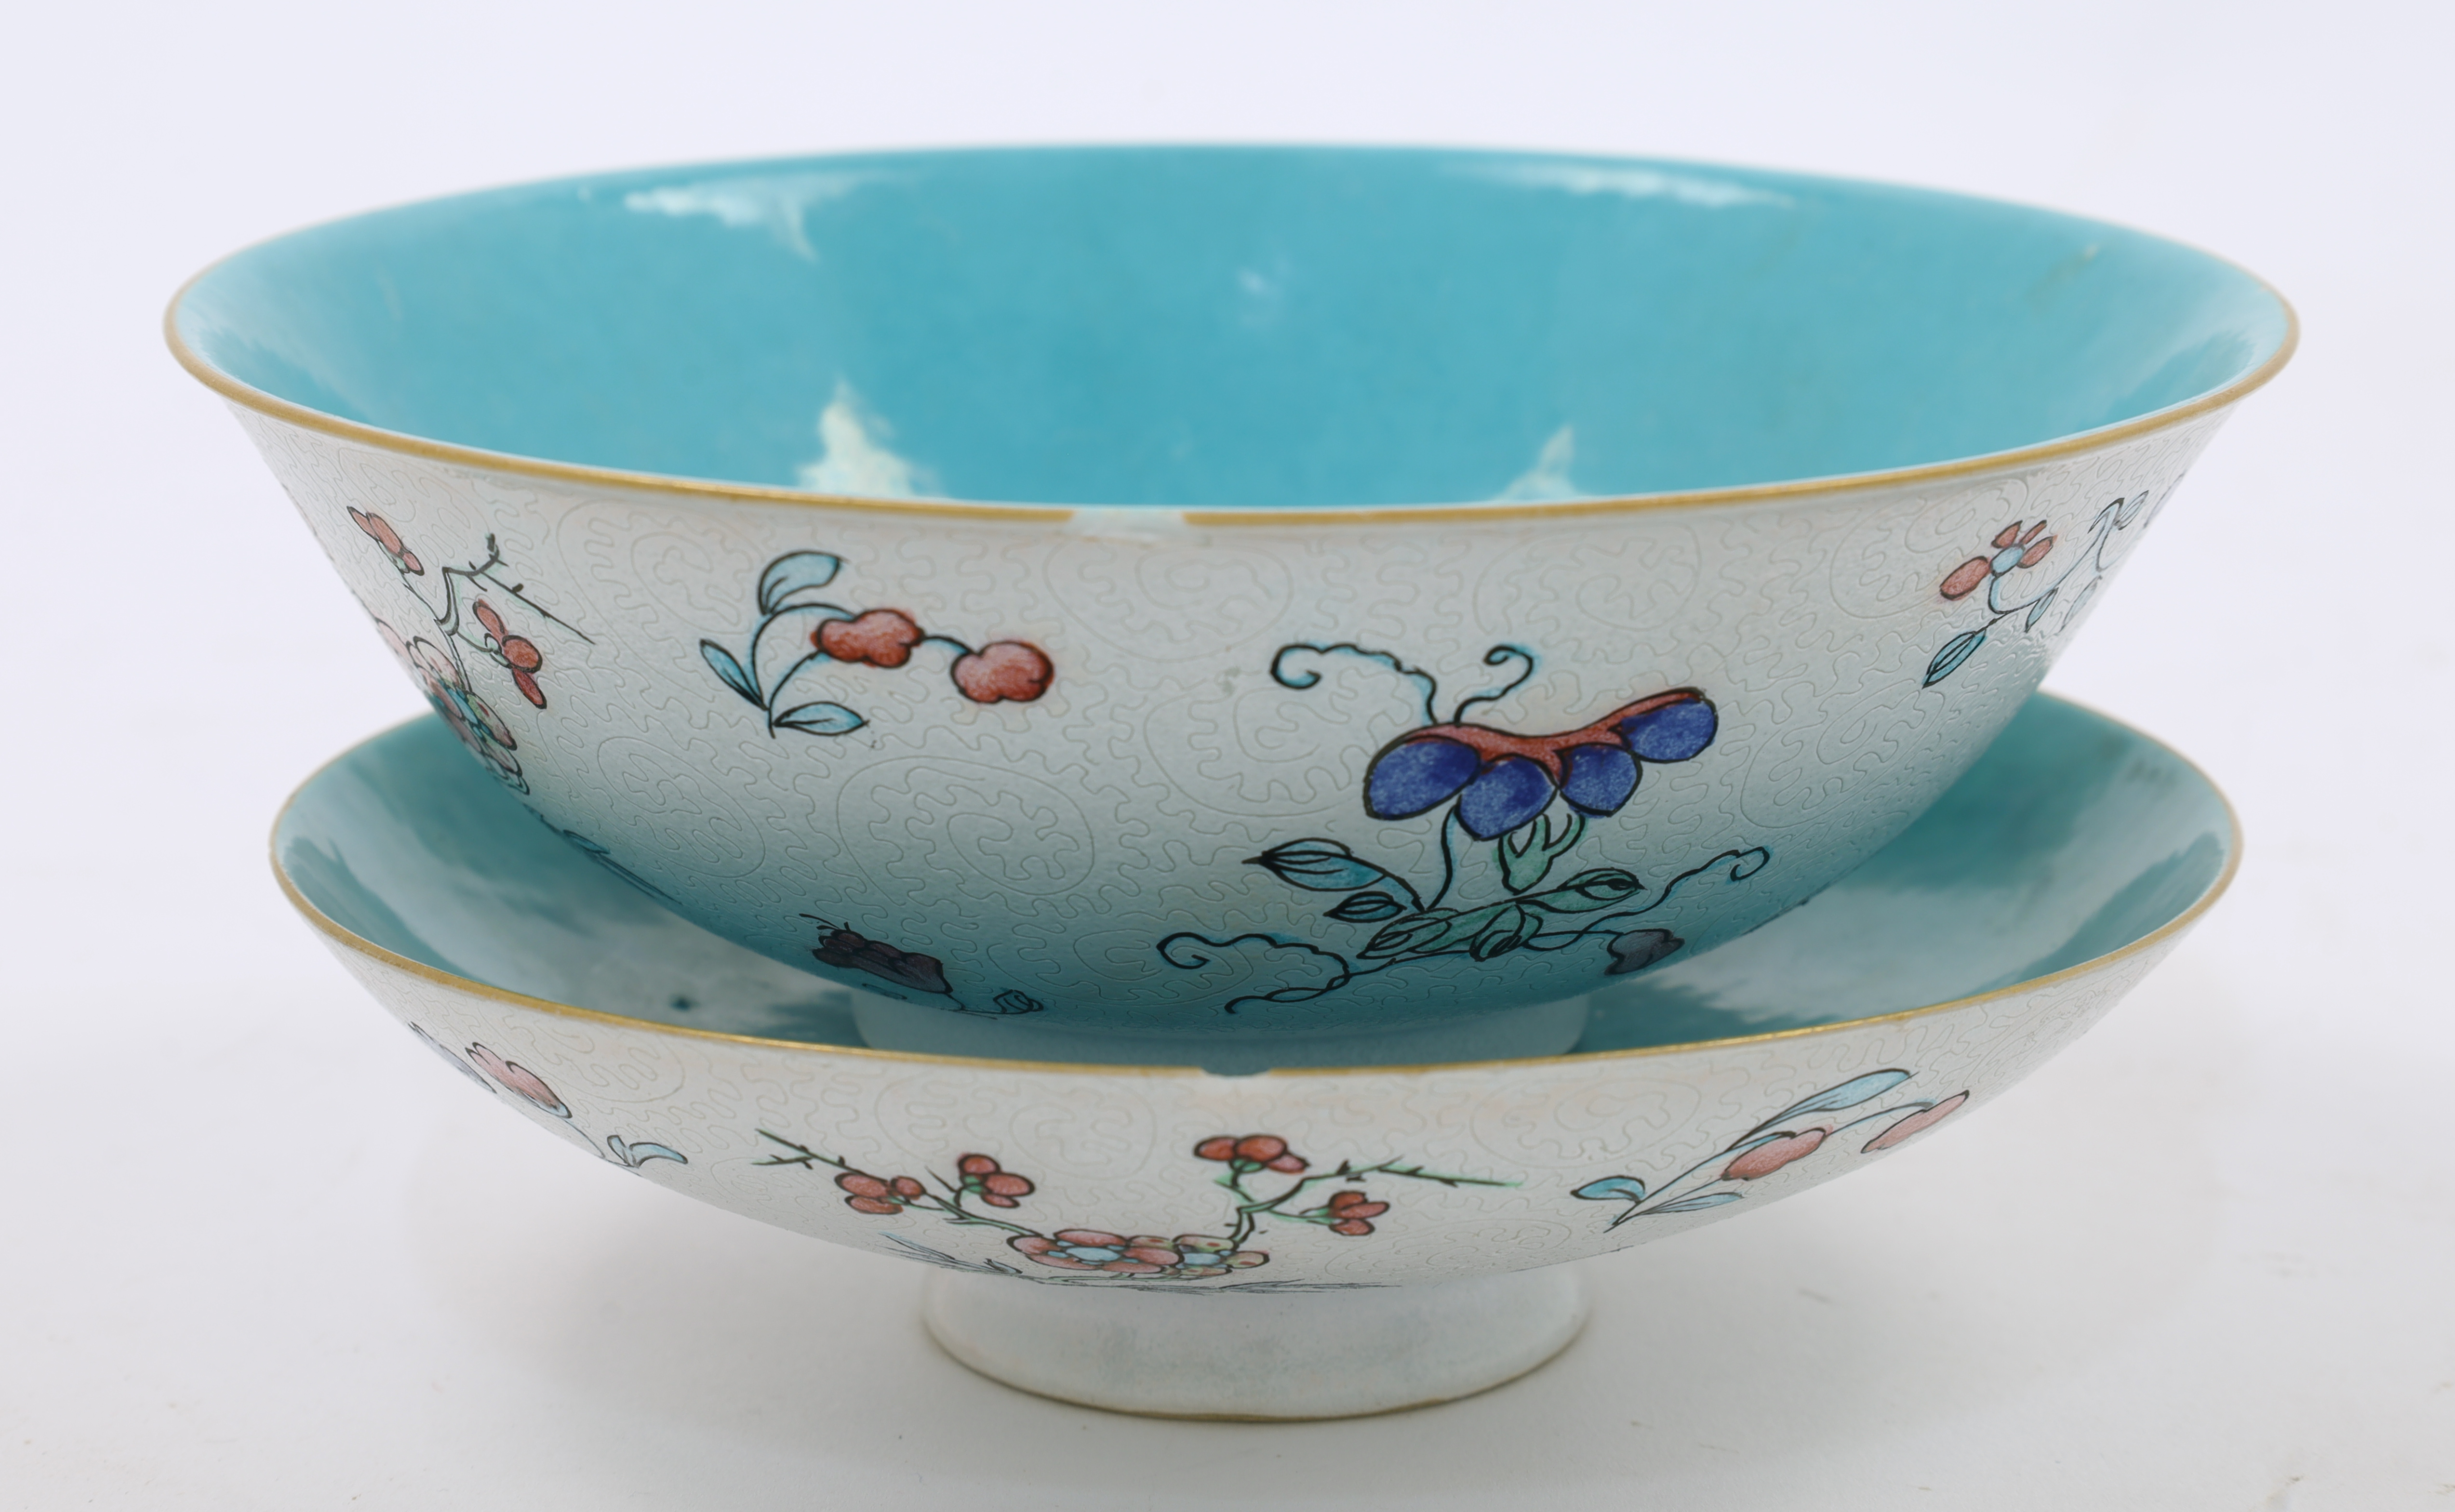 A Chinese porcelain bowl and cover, Qing dynasty, early 20th century, apocryphal Qianlong mark to... - Image 2 of 2